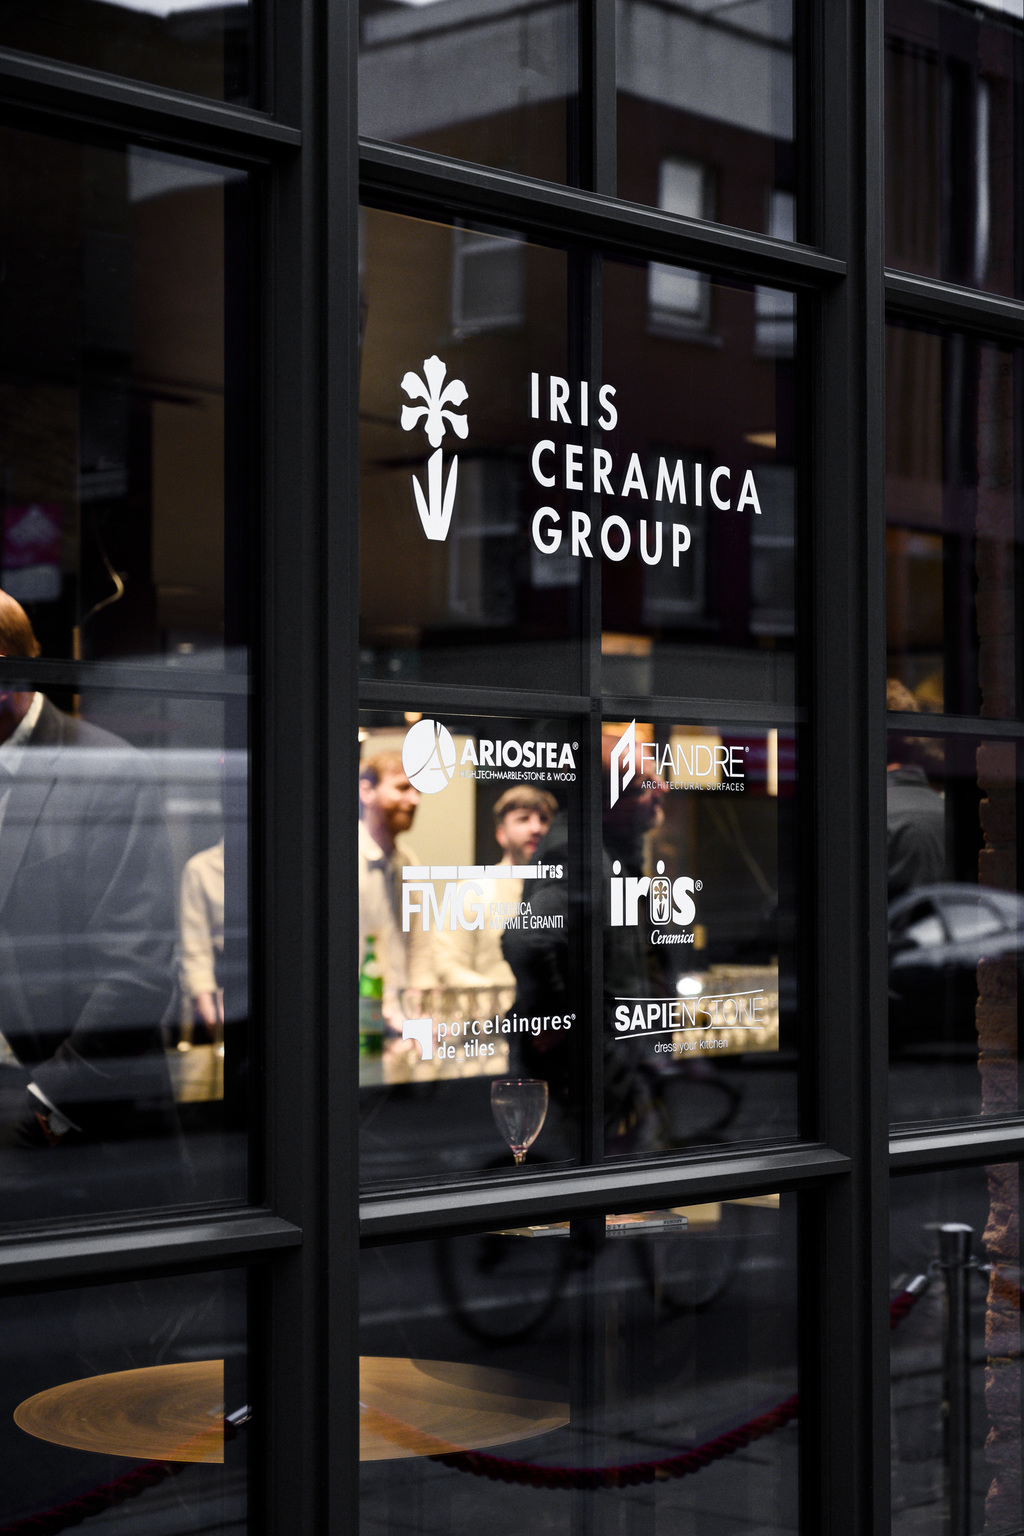 THE FIRST IRIS CERAMICA GROUP SHOWROOM OPENS IN LONDON